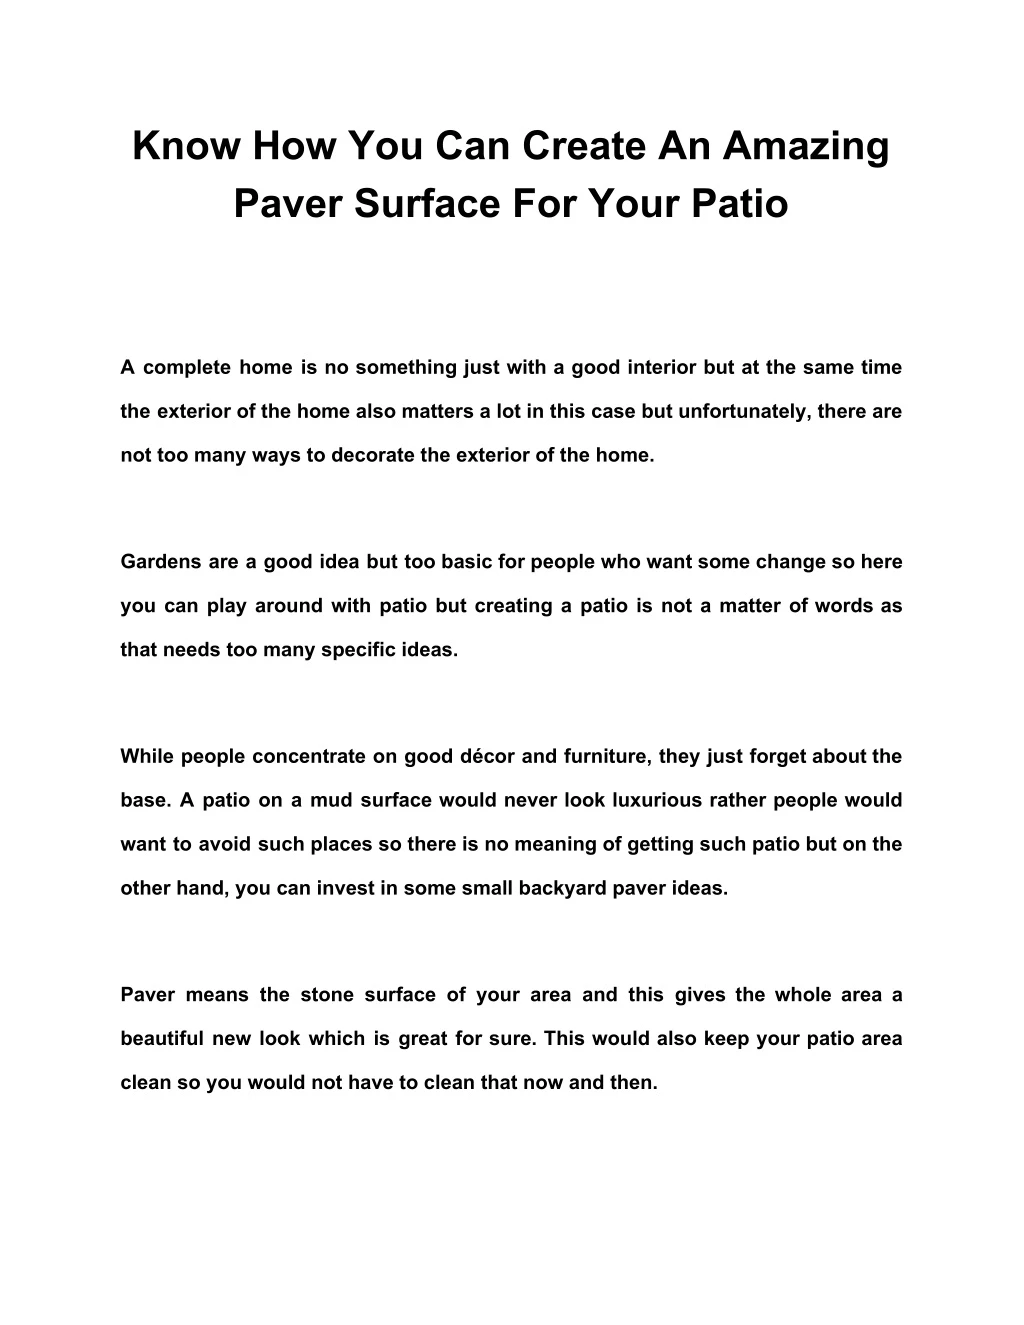 know how you can create an amazing paver surface